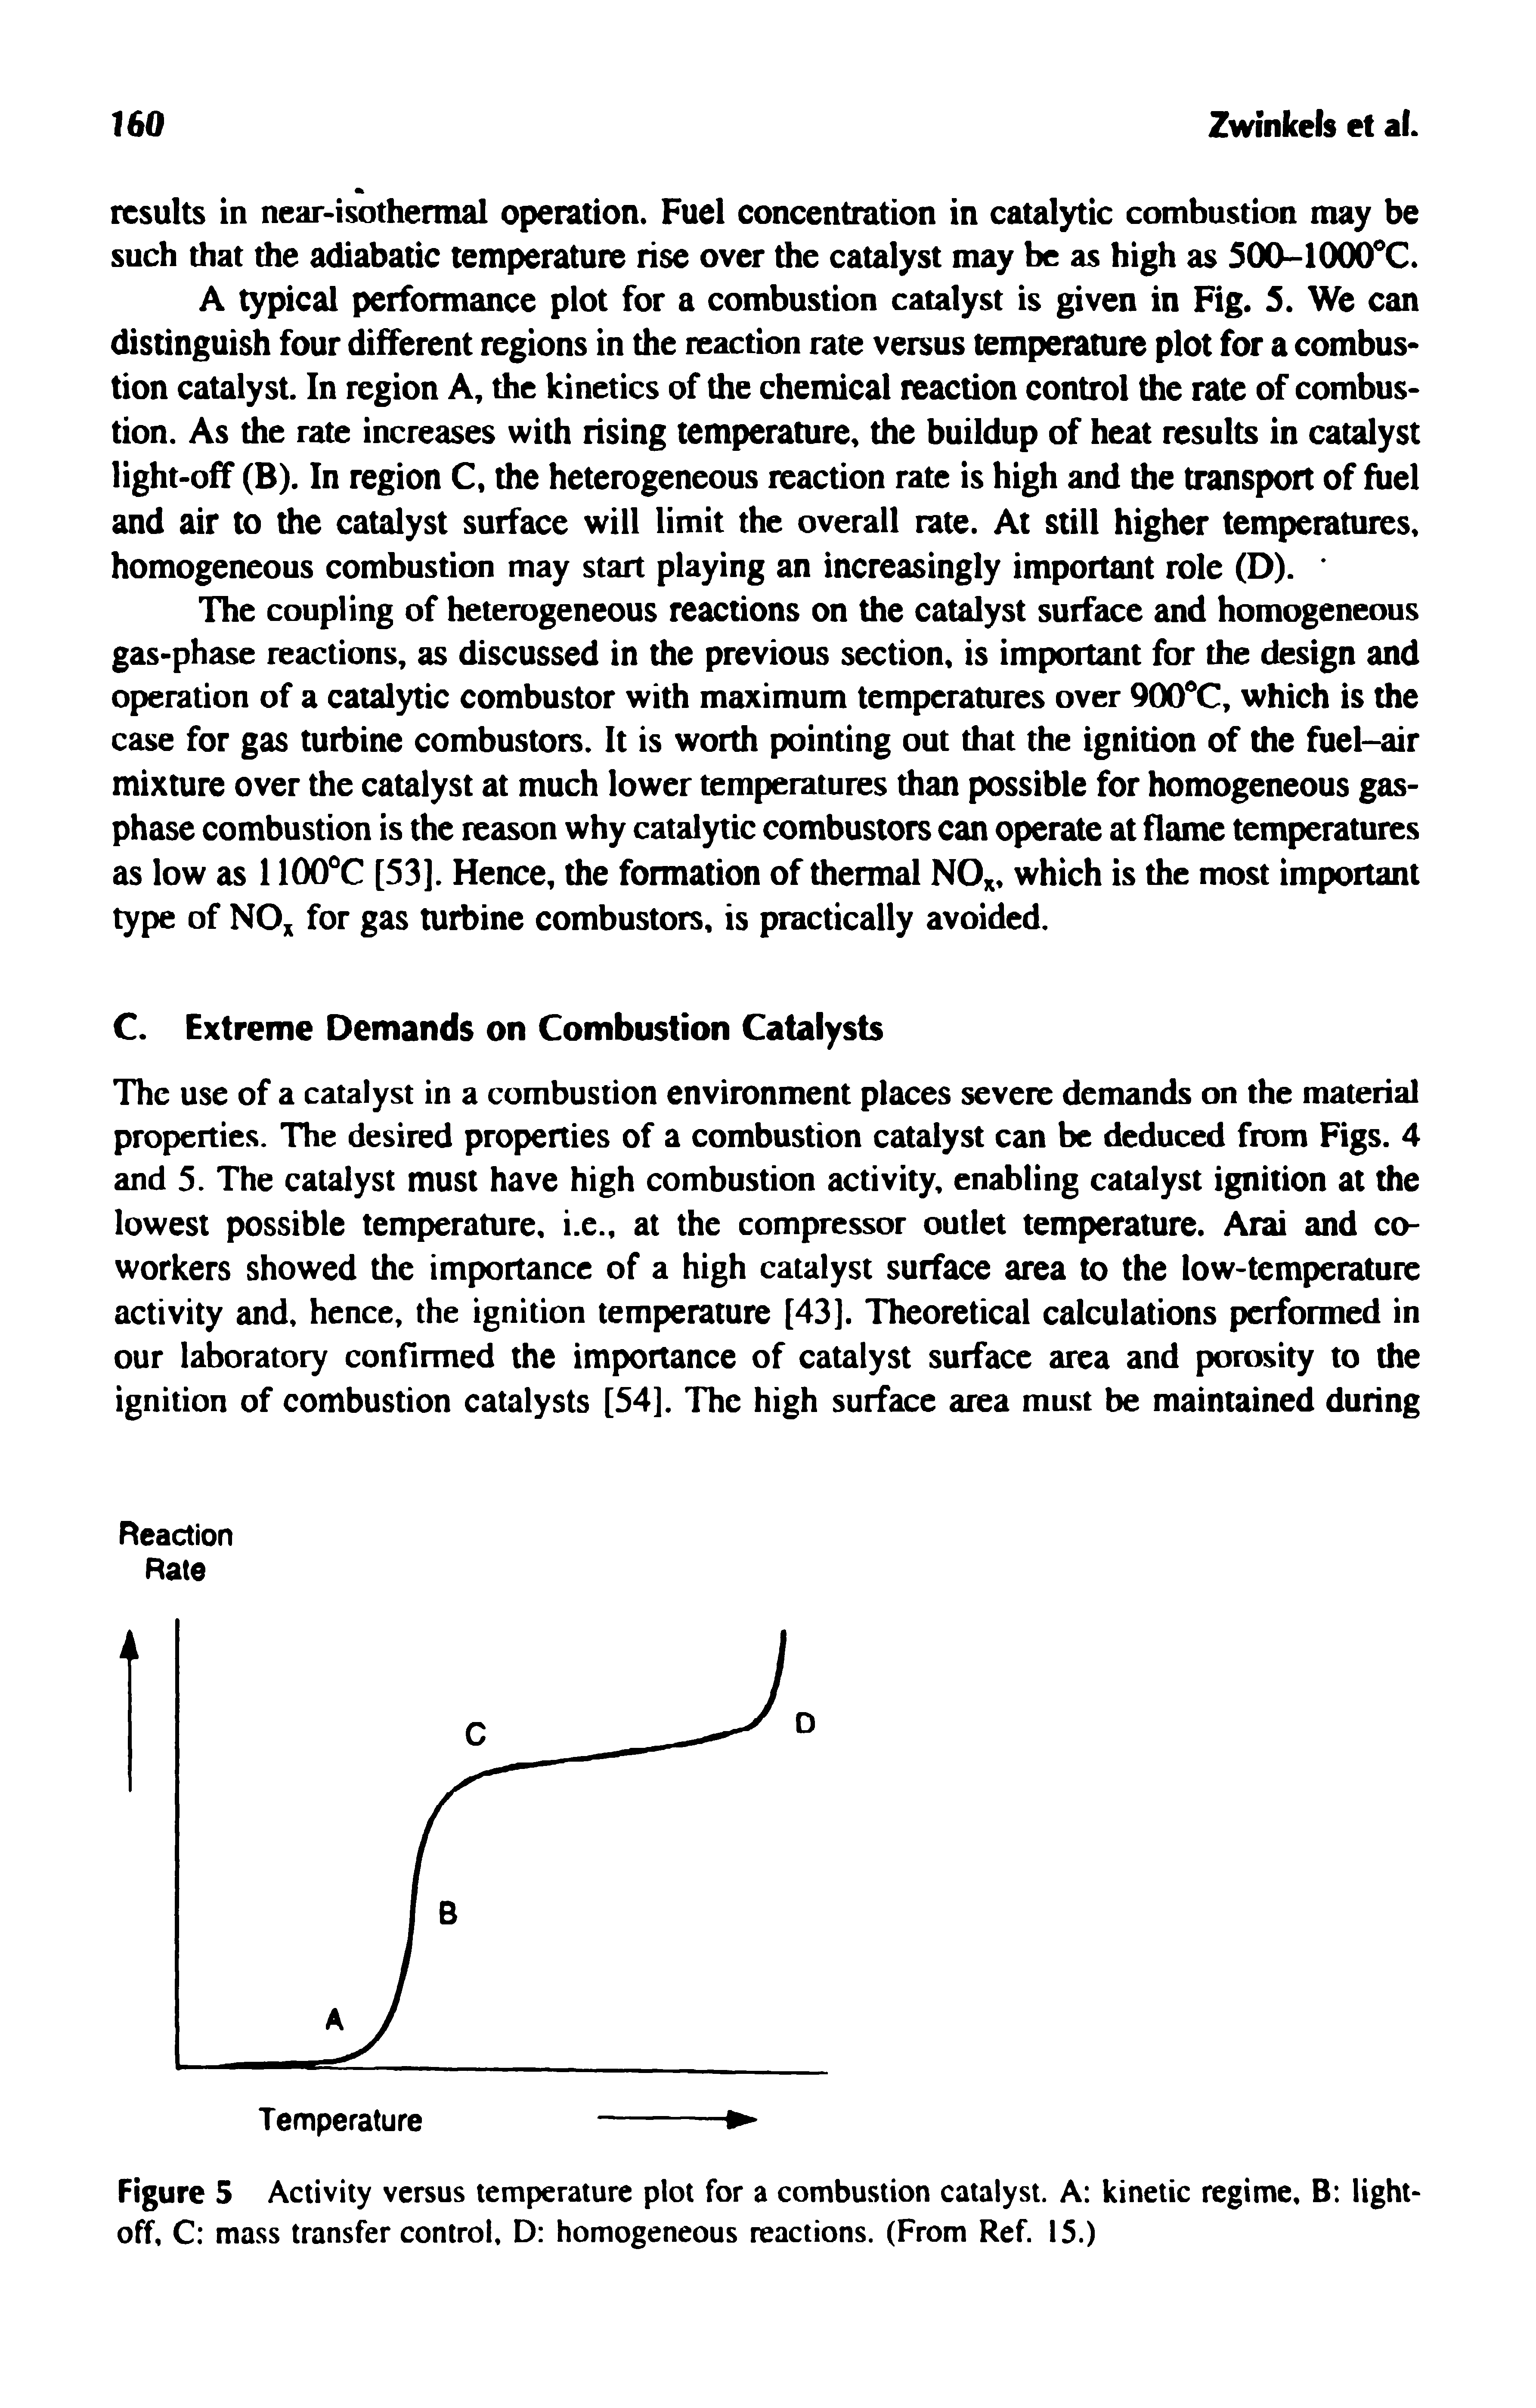 Figure 5 Activity versus temperature plot for a combustion catalyst. A kinetic regime. B light-off, C mass transfer control. D homogeneous reactions. (From Ref. 15.)...